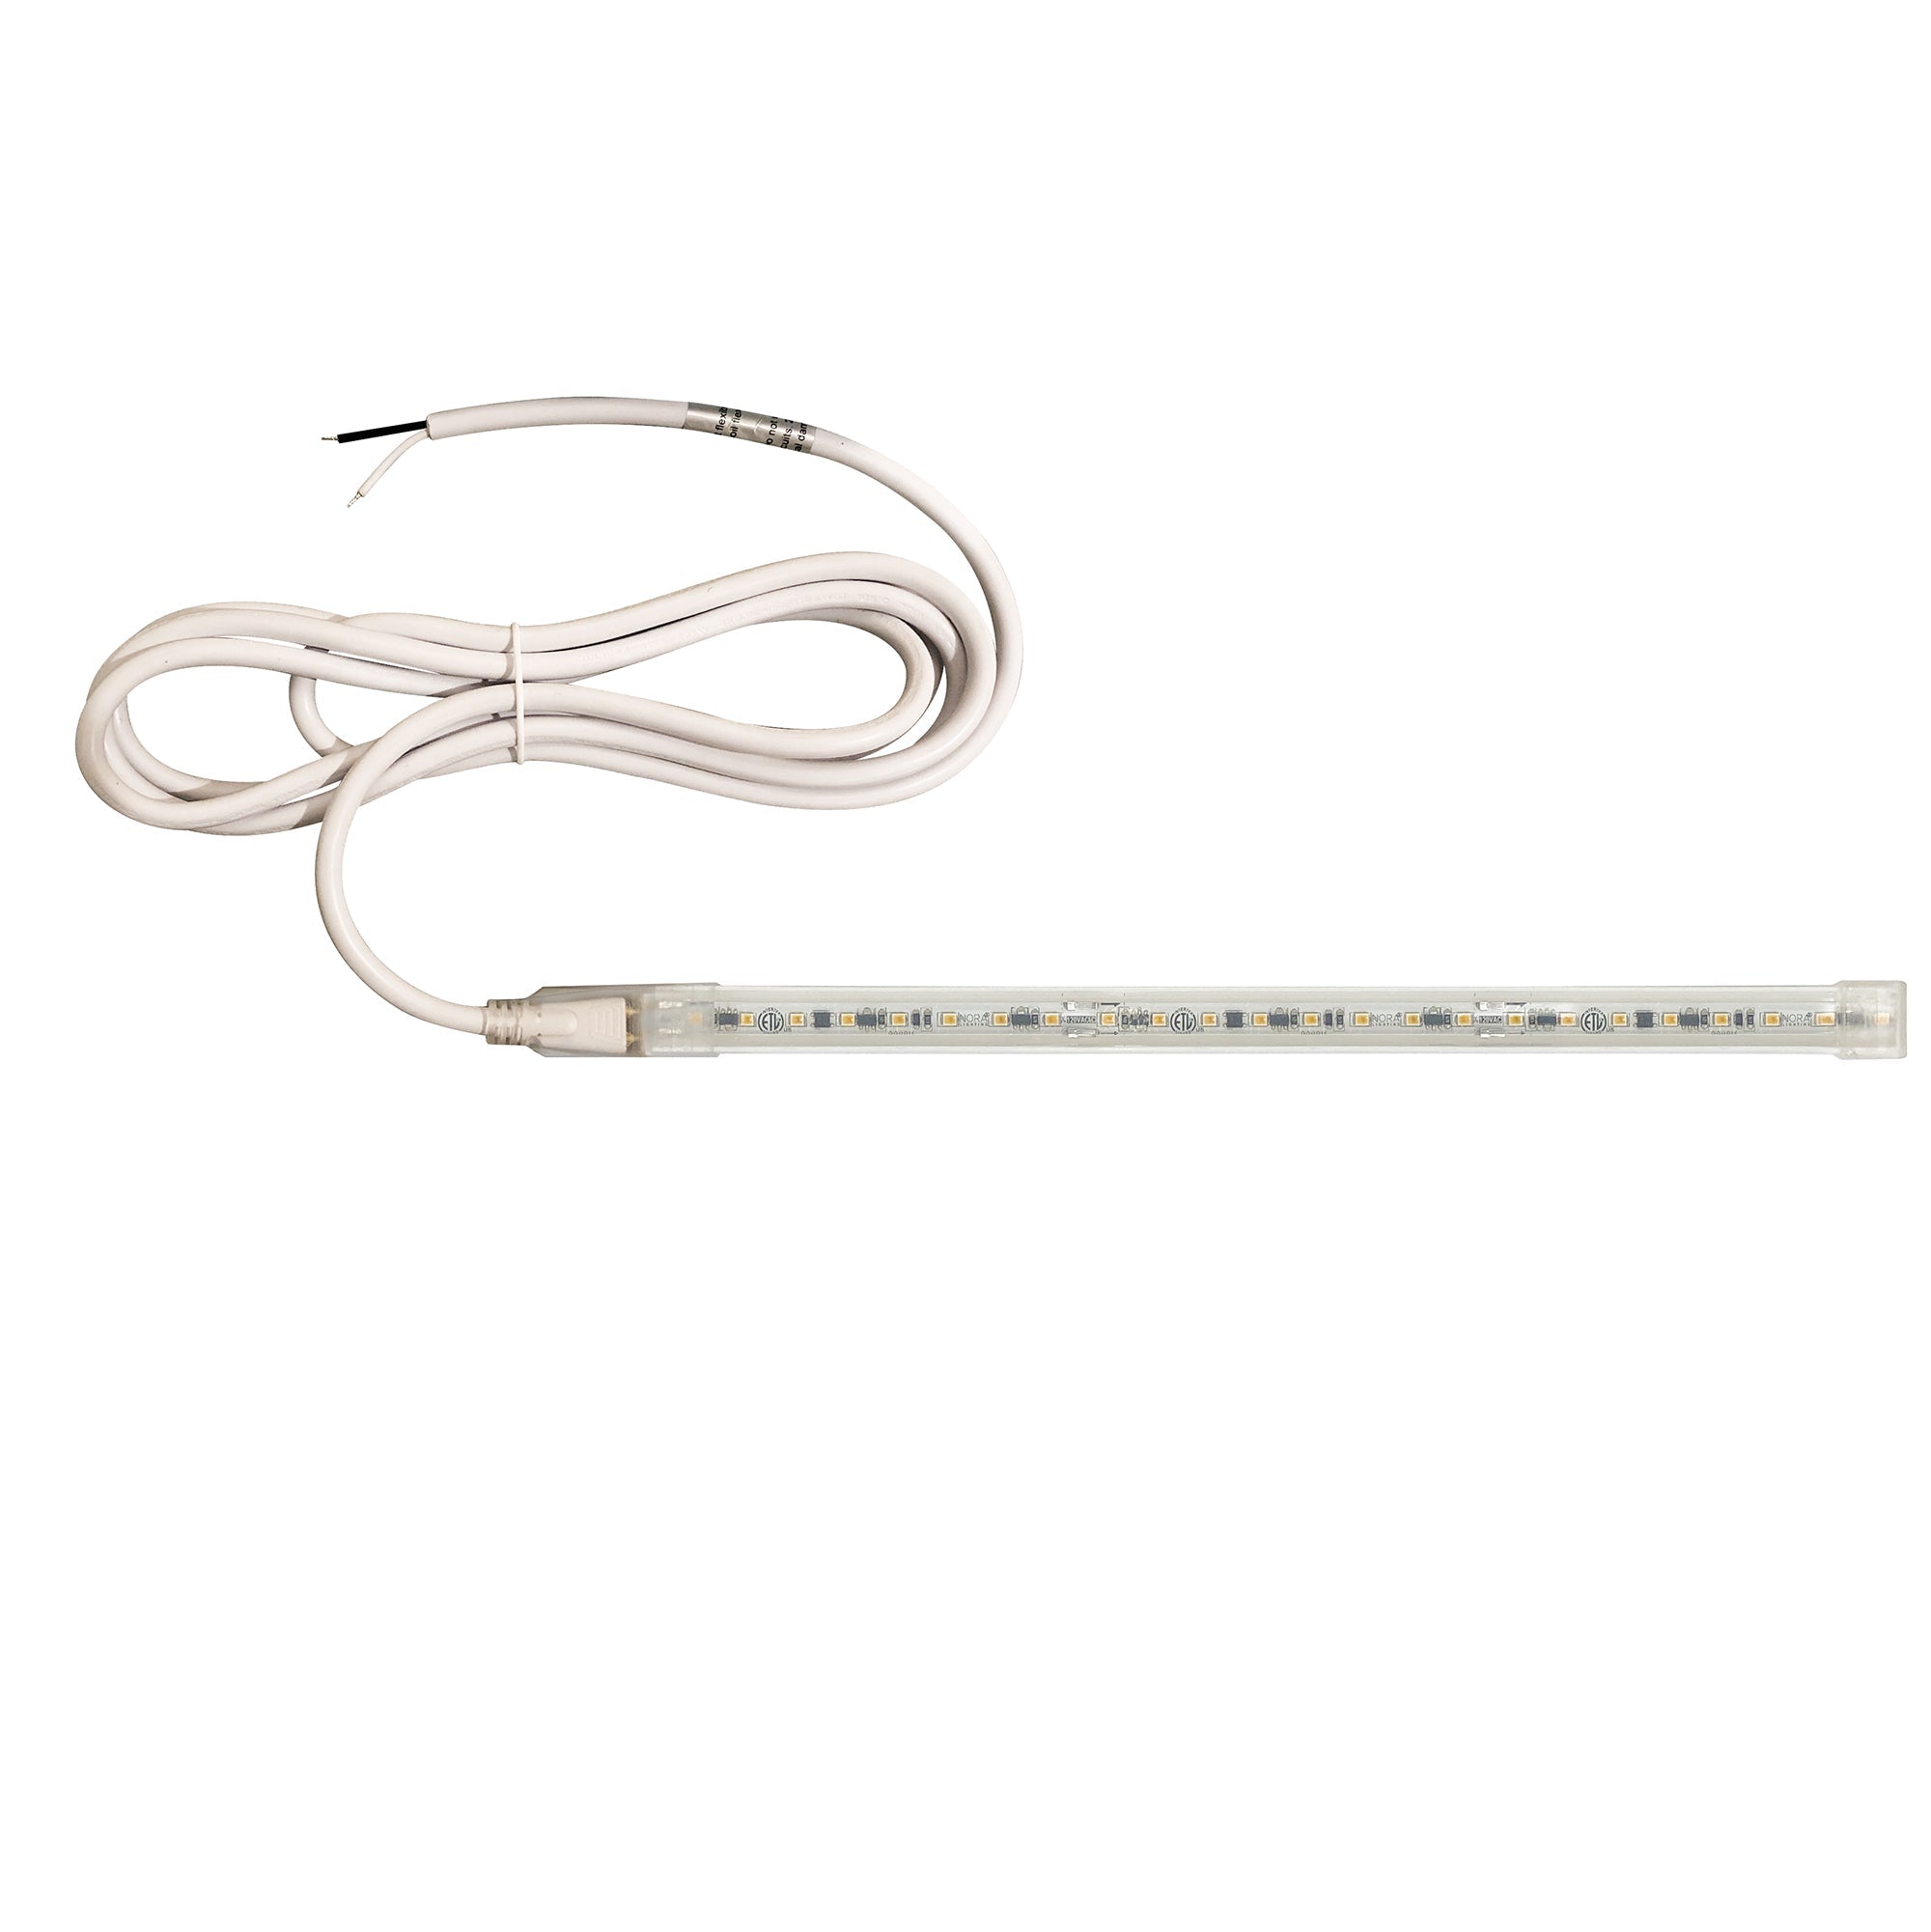 Nora Lighting NUTP13-W86-12-940/HW - Accent / Undercabinet - Custom Cut 86-ft 120V Continuous LED Tape Light, 330lm / 3.6W per foot, 4000K, w/ Mounting Clips and 8' Hardwired Power Cord